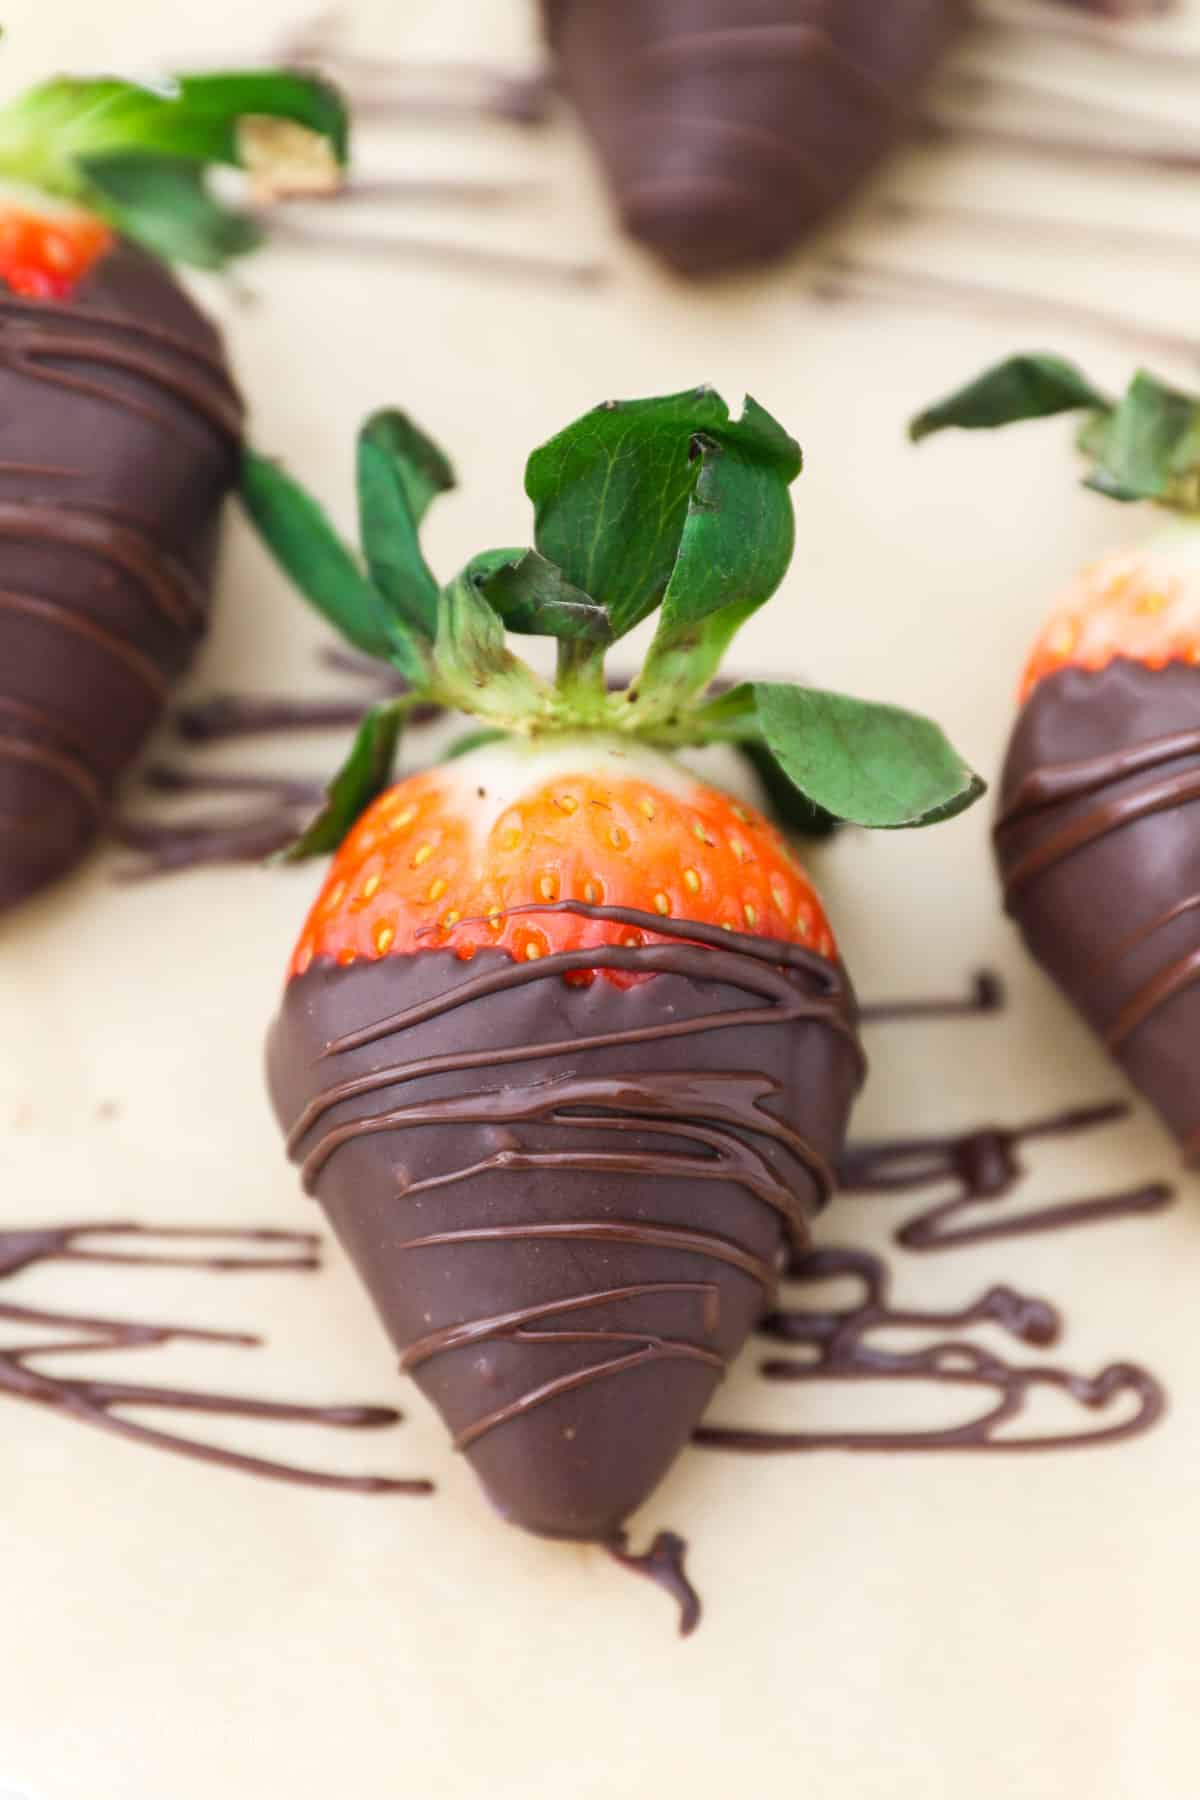 A chocolate covered strawberry on a lined baking sheet, drizzled with chocolate.